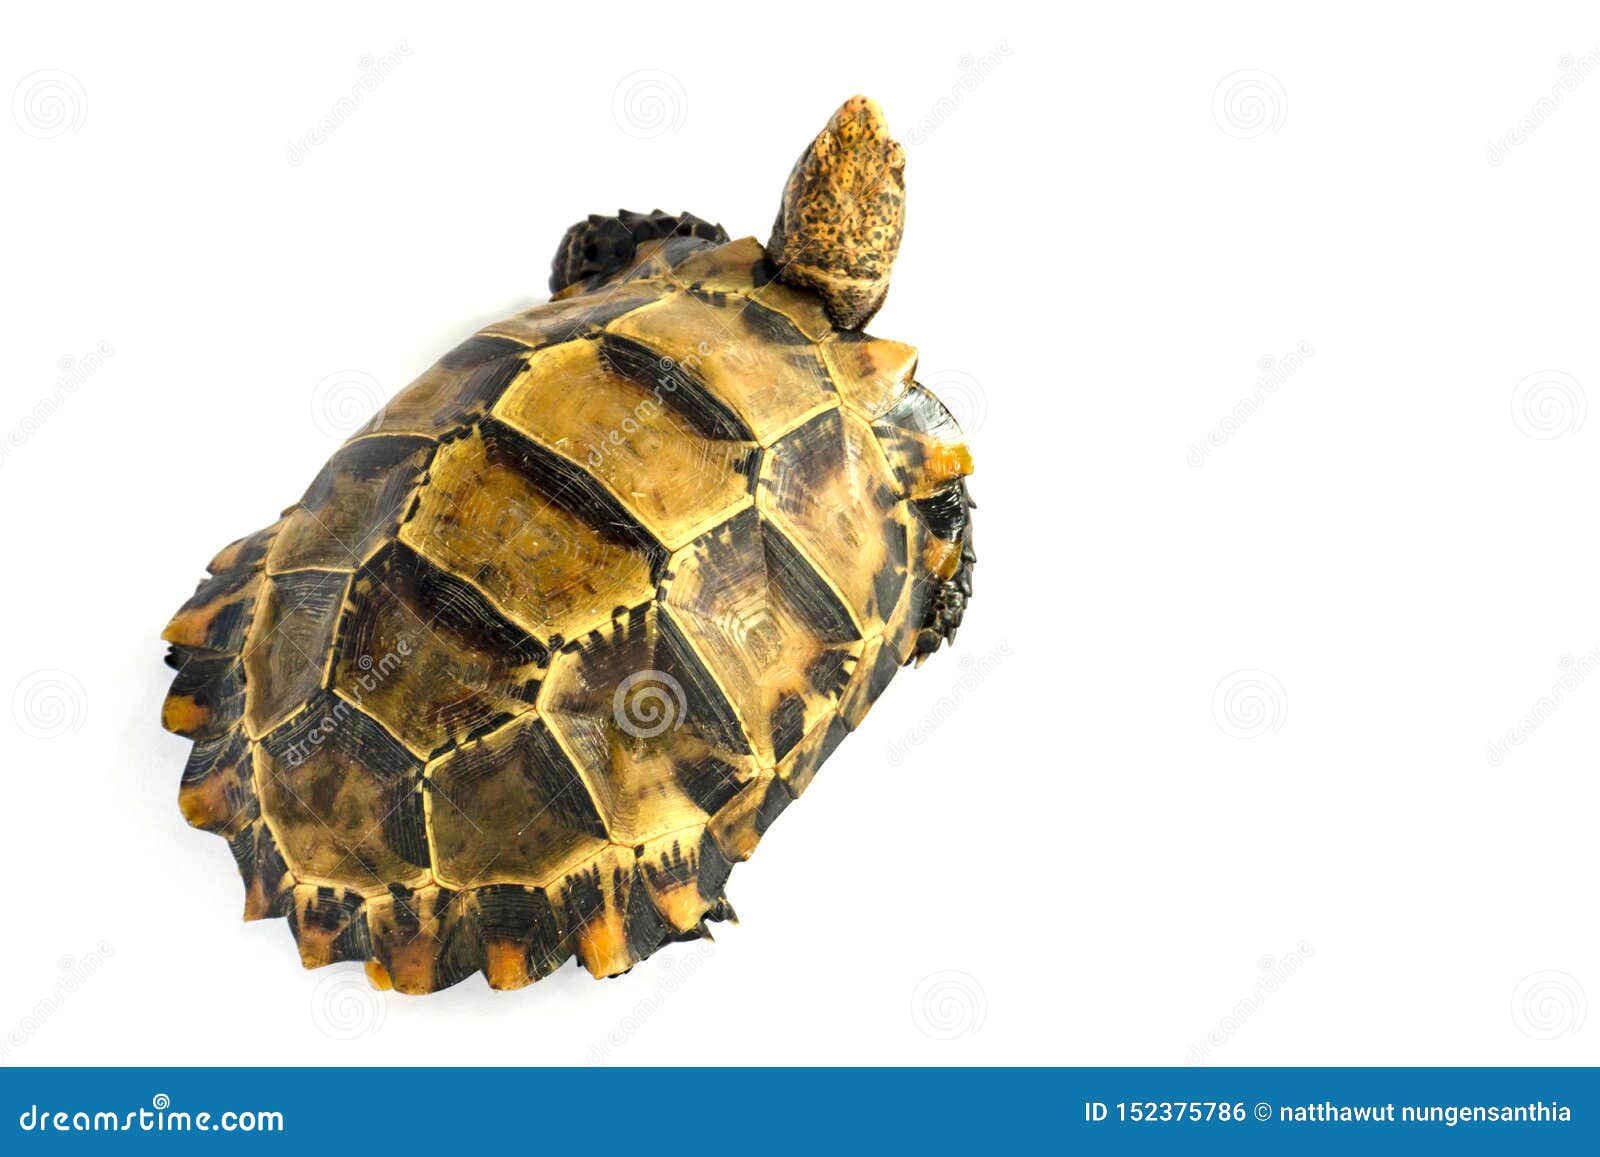 Inland Turtles in Asia are Called 